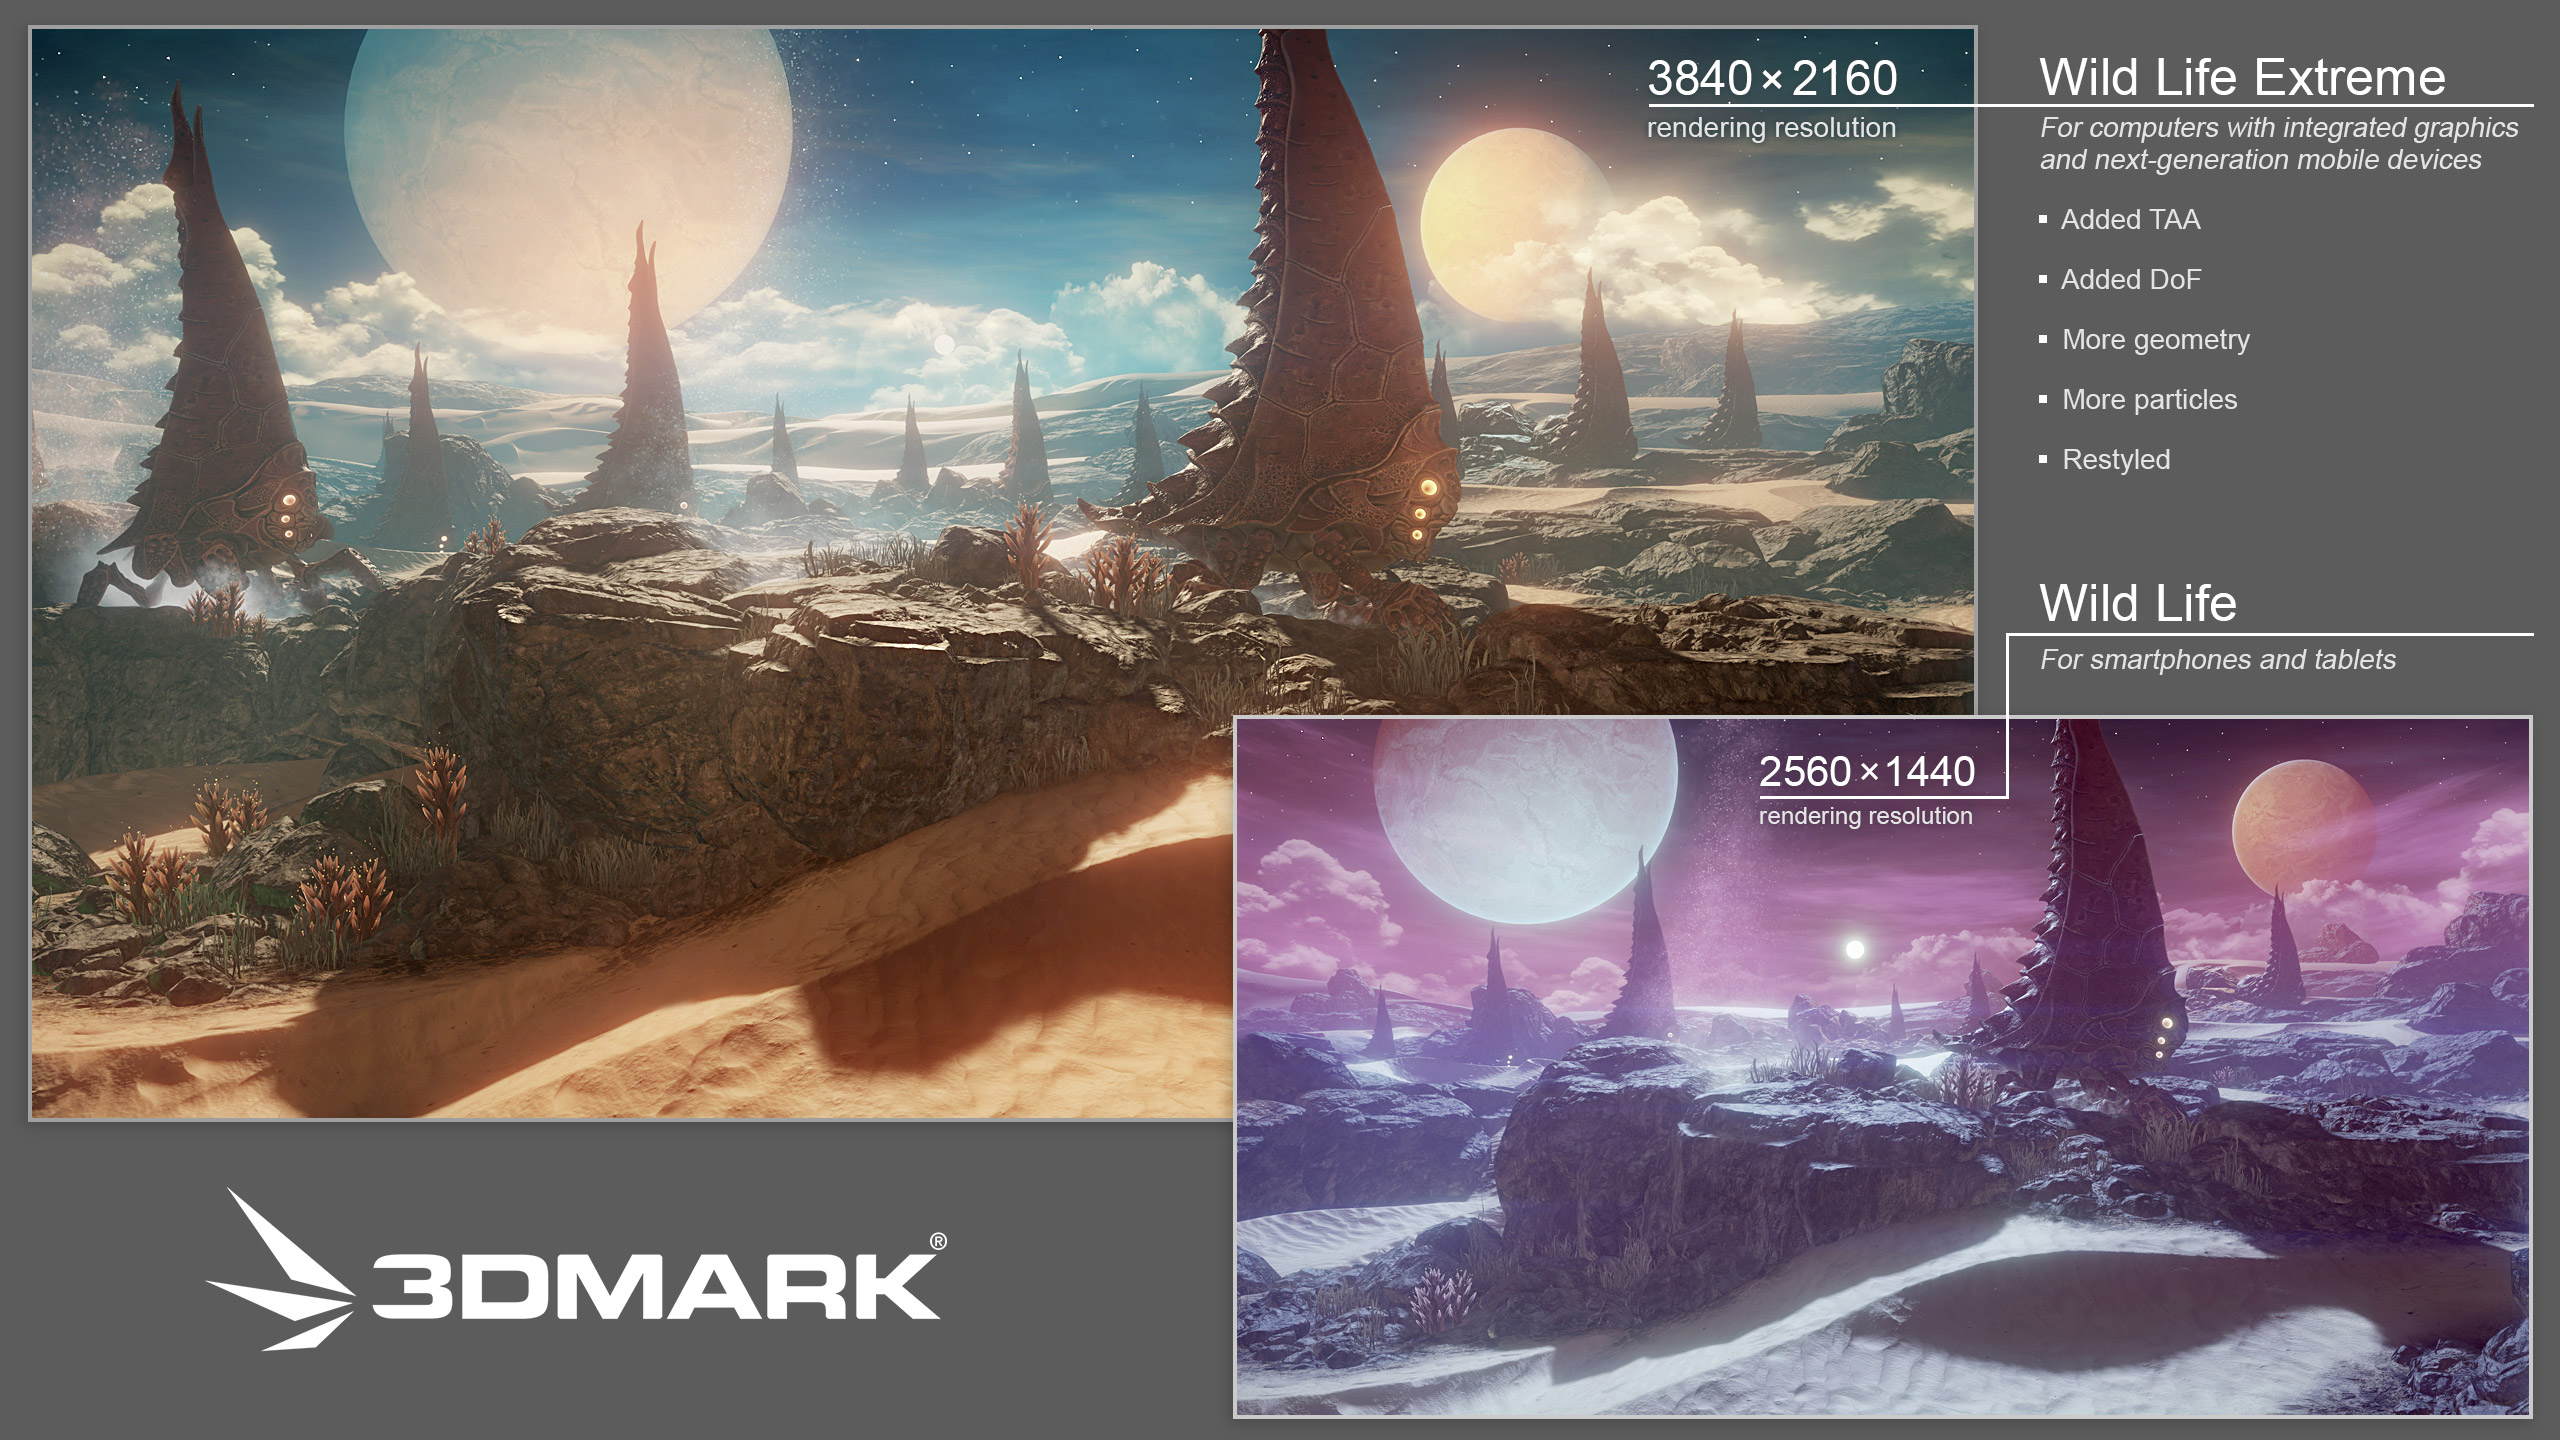 Comparison of 3DMark Wild Life and 3DMark Wild Life Extreme benchmarks